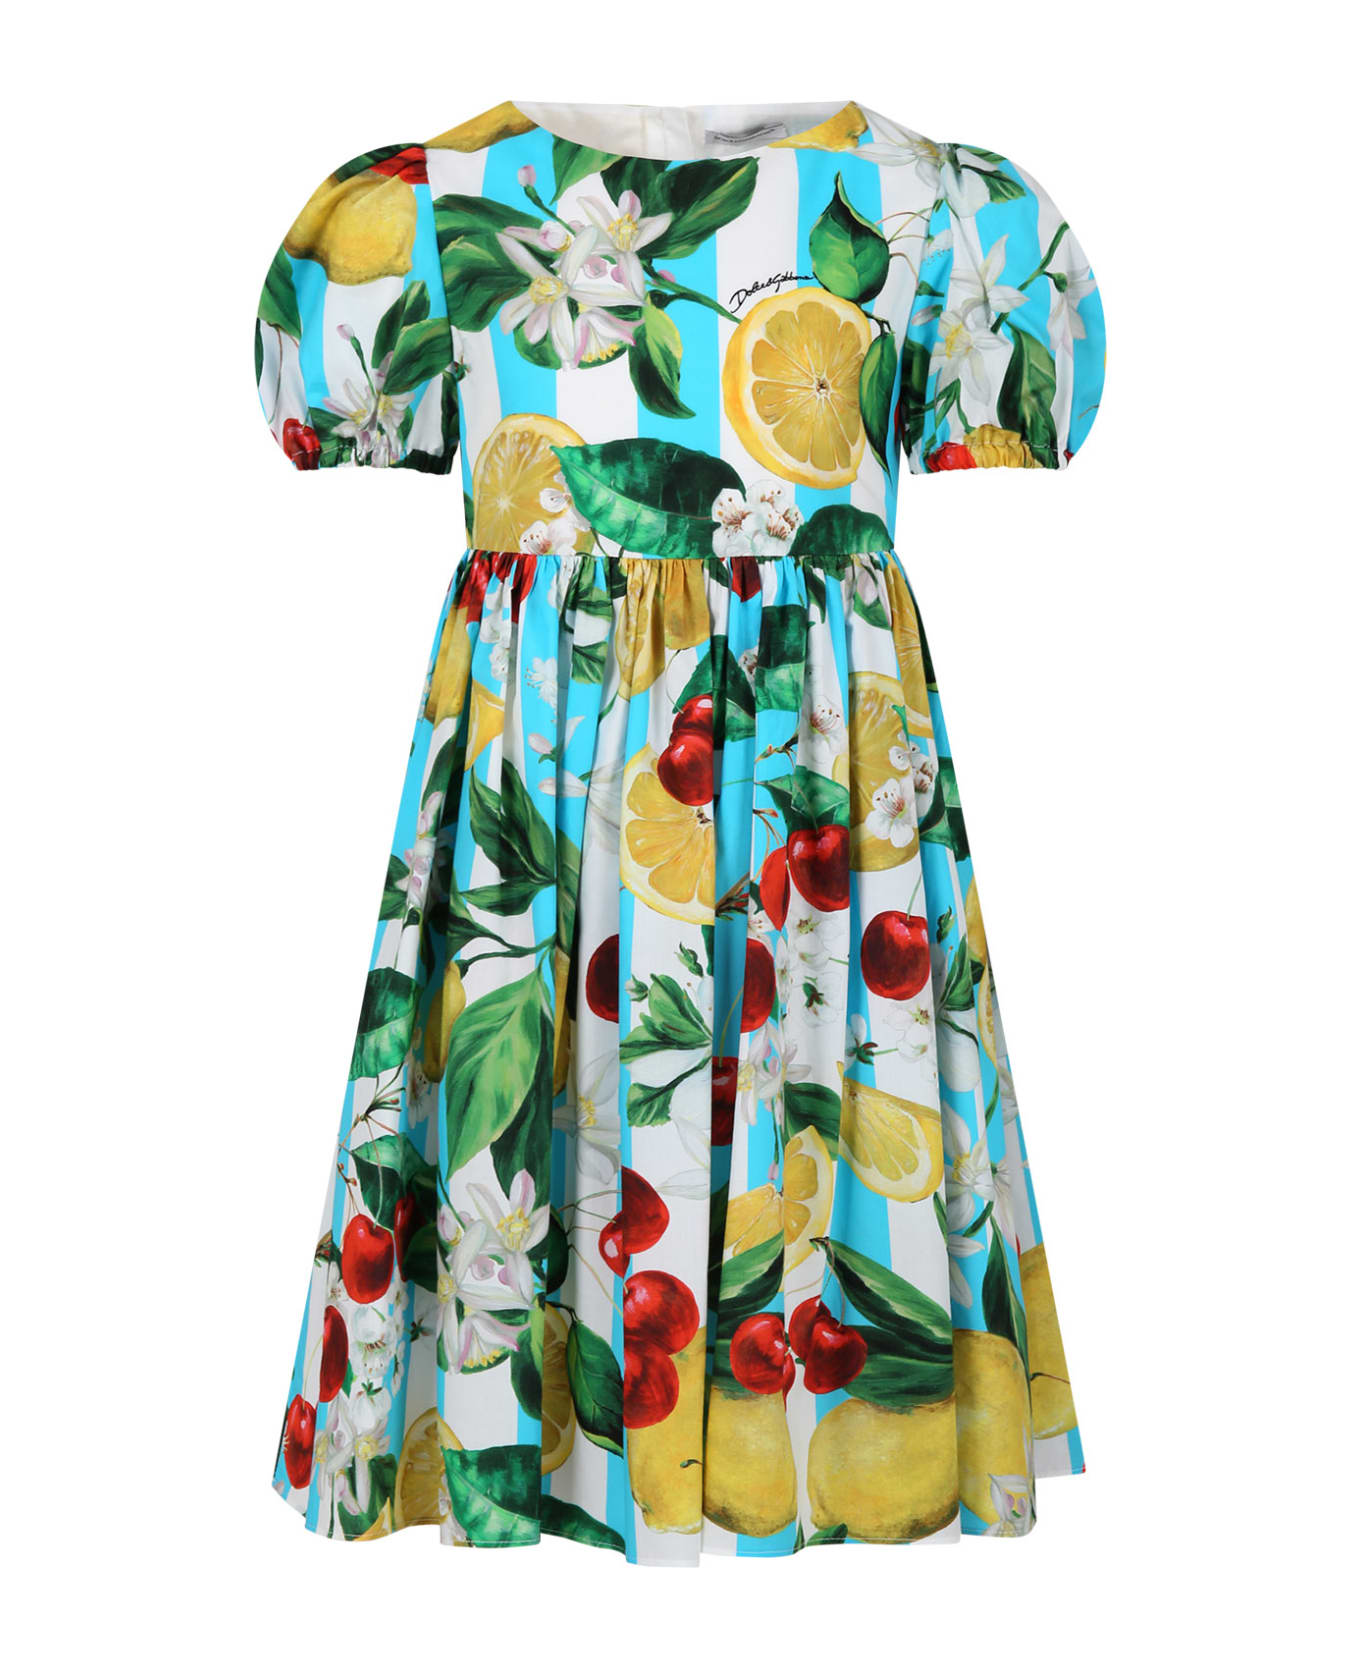 Dolce & Gabbana Multicolor Dress For Girl With All-over Flowers And Fruits - Multicolor